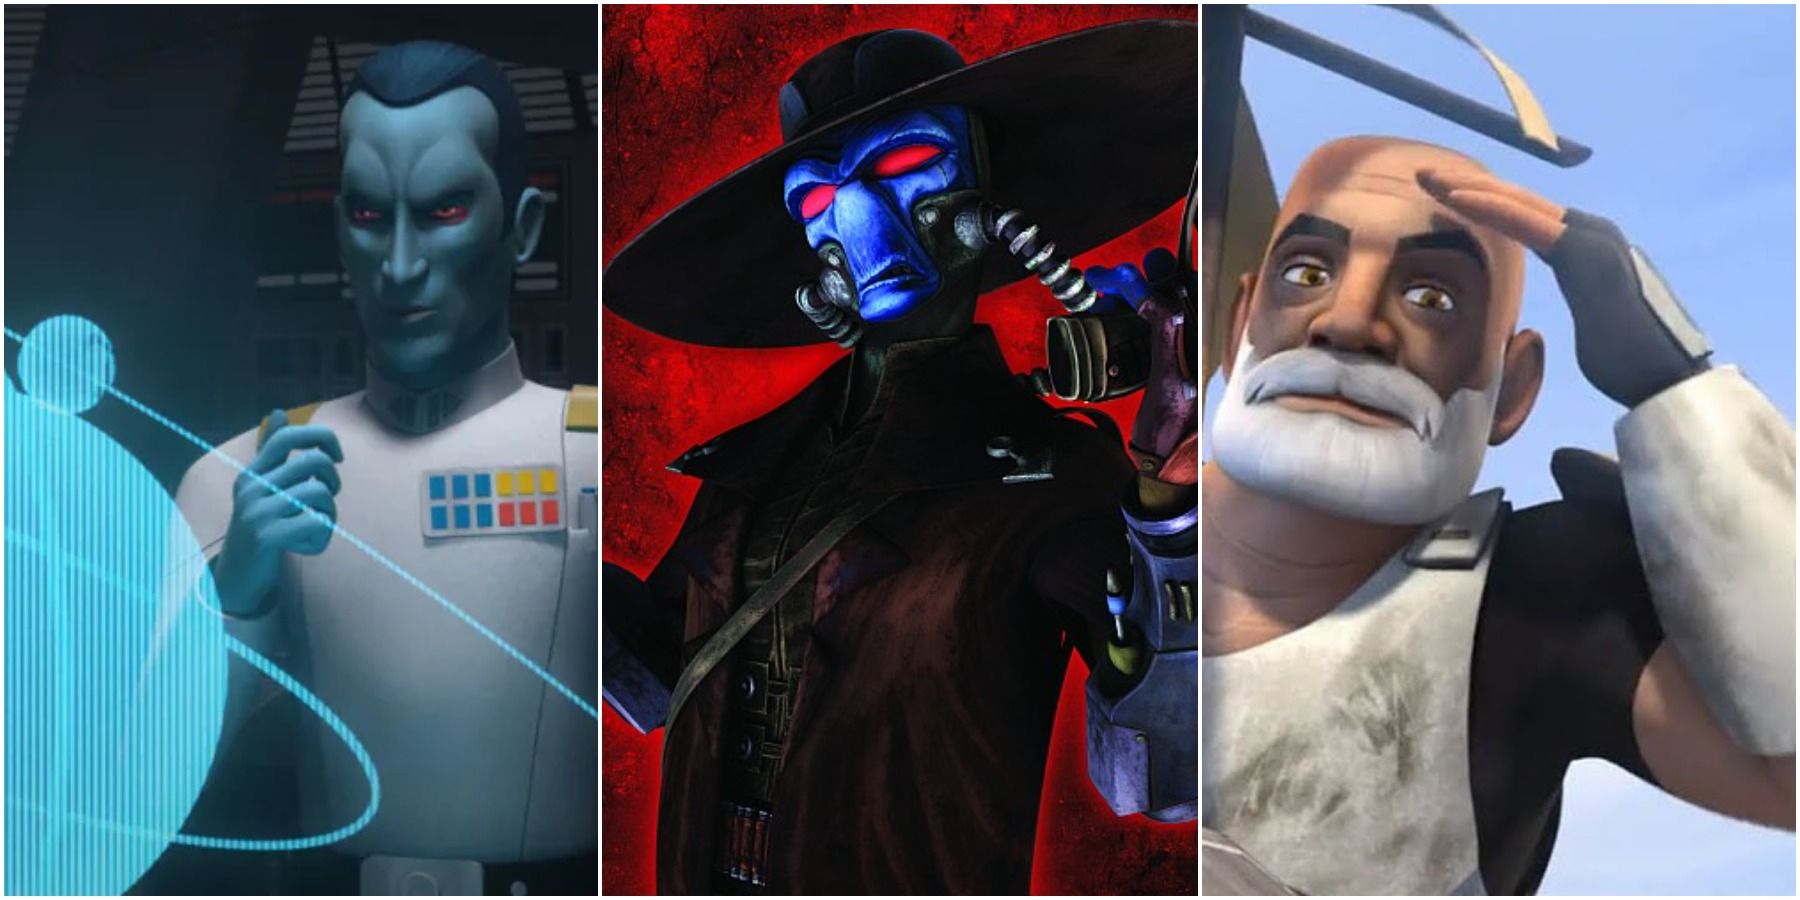 Star Wars Animated Characters Who Could Appear in Live-Action